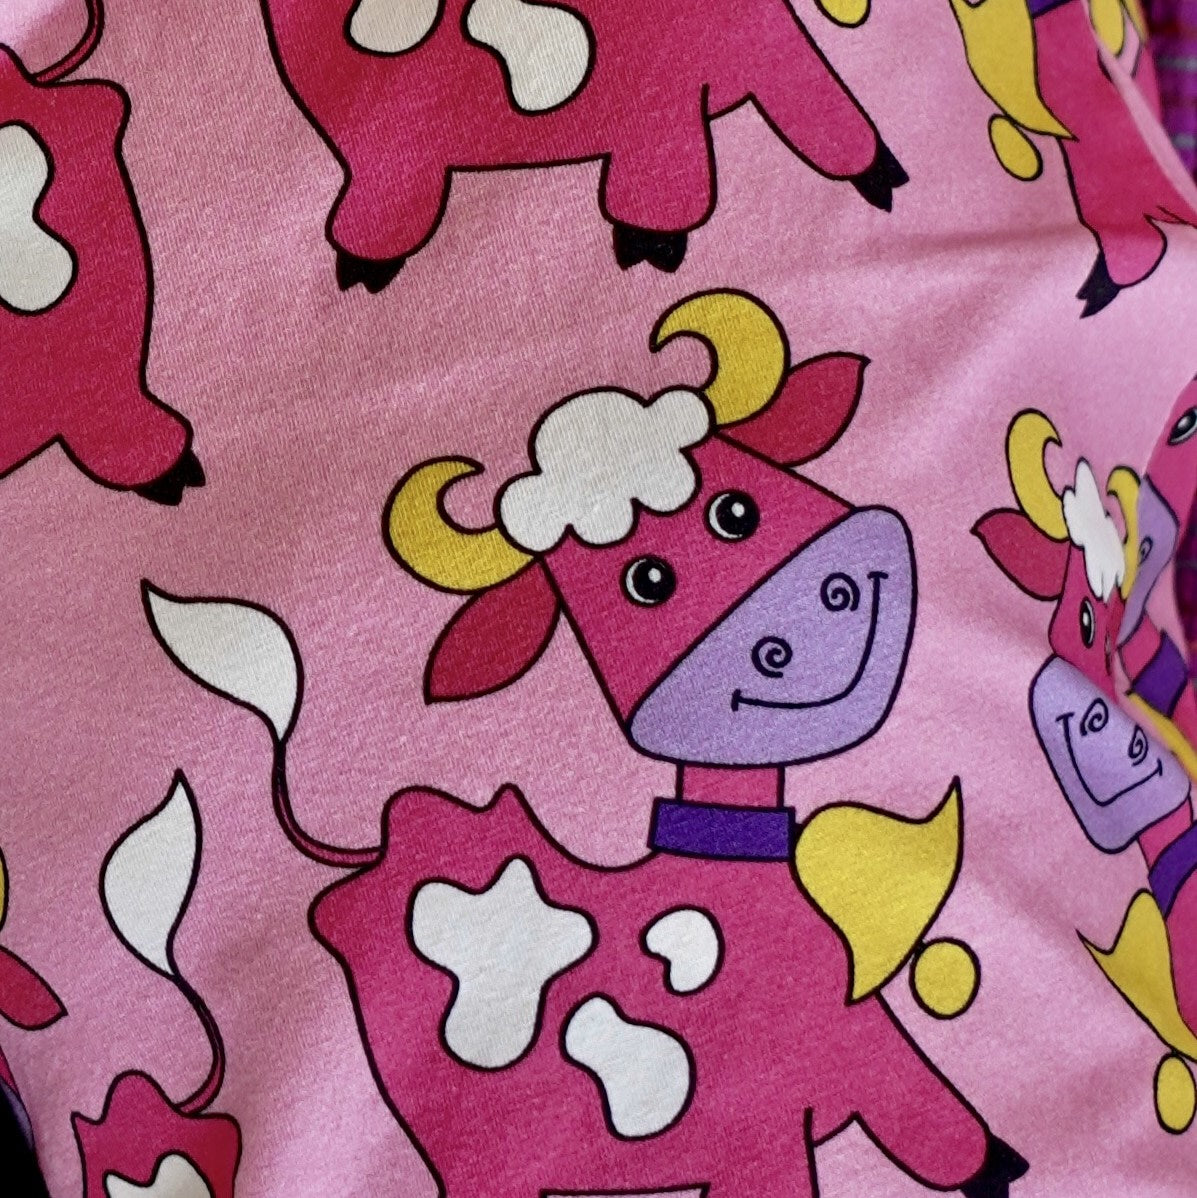 T-shirt with cows